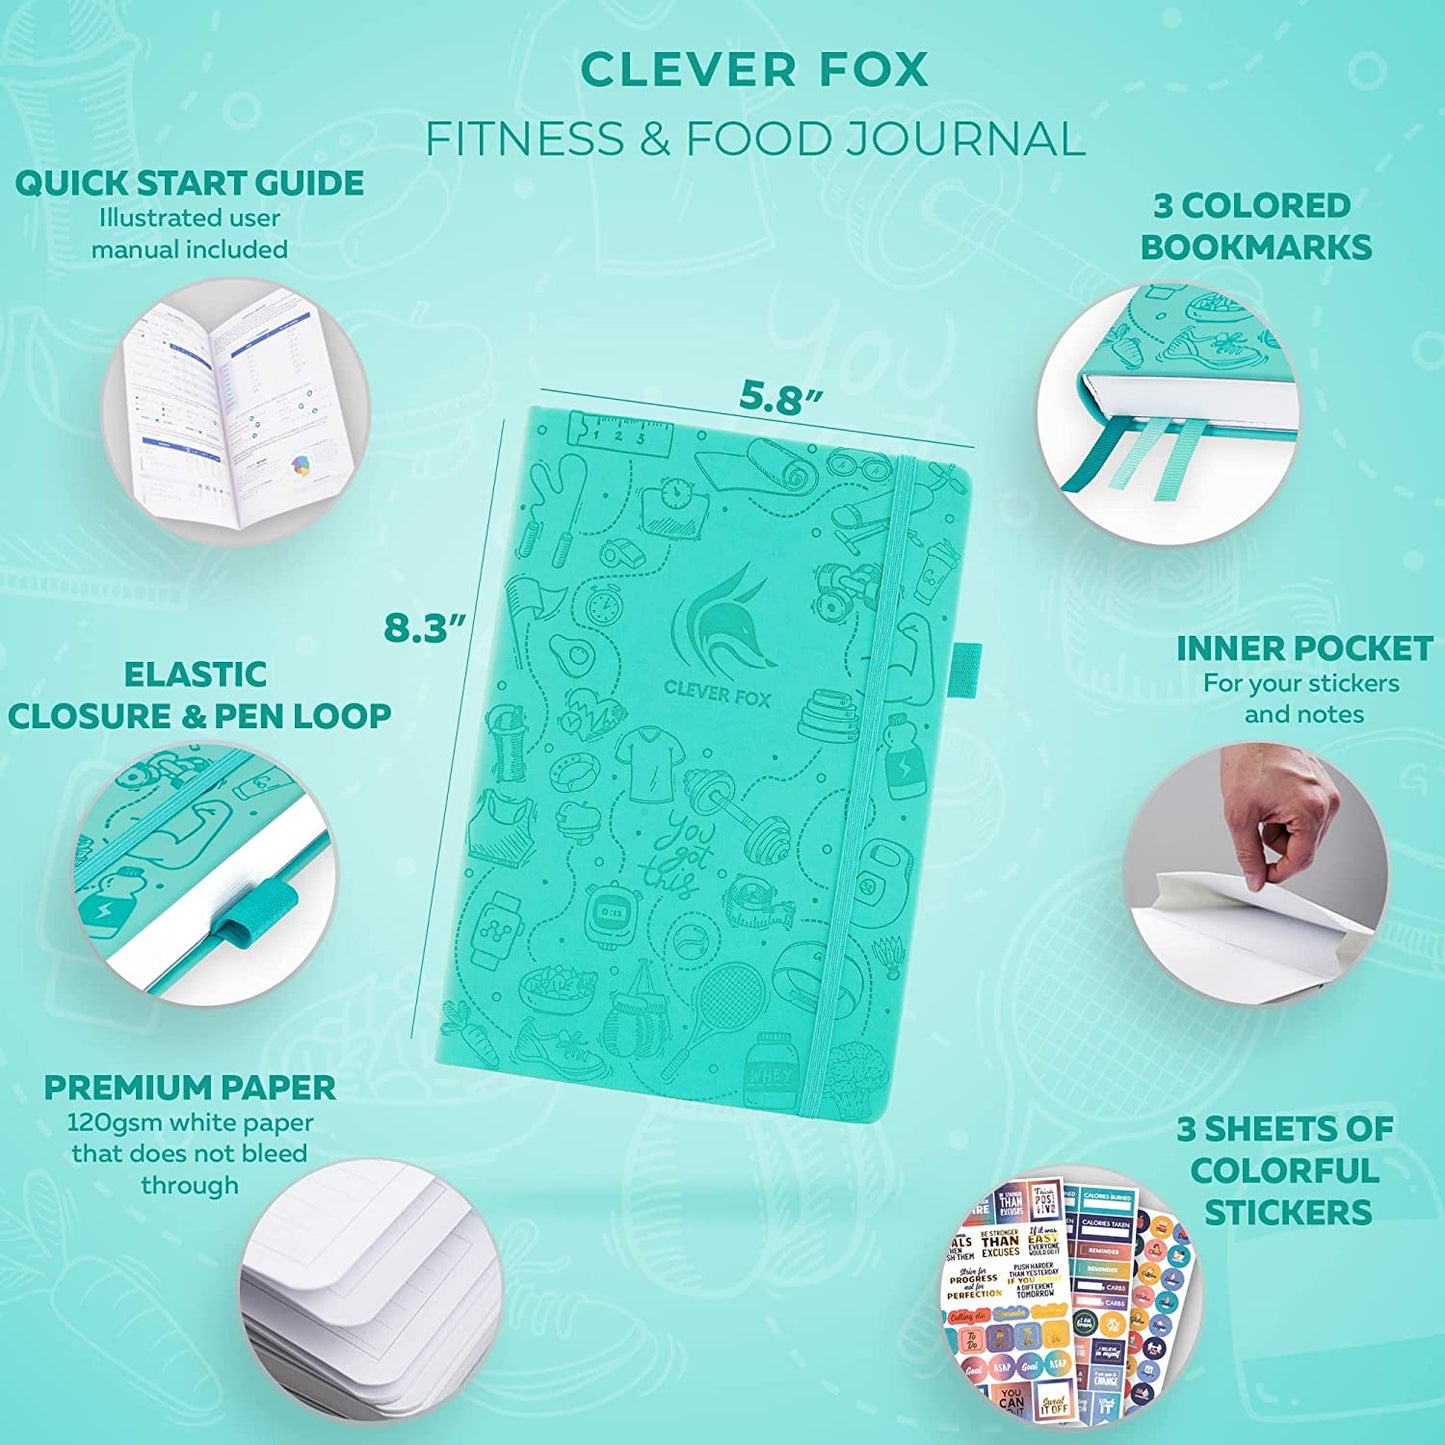 Clever Fox Fitness & Food Journal – Nutrition & Workout Planner for Women & Men – Diet & Gym Exercise Log Book with Calendars, Diet & Training Trackers - Undated, A5 Size, Hardcover (Turquoise)